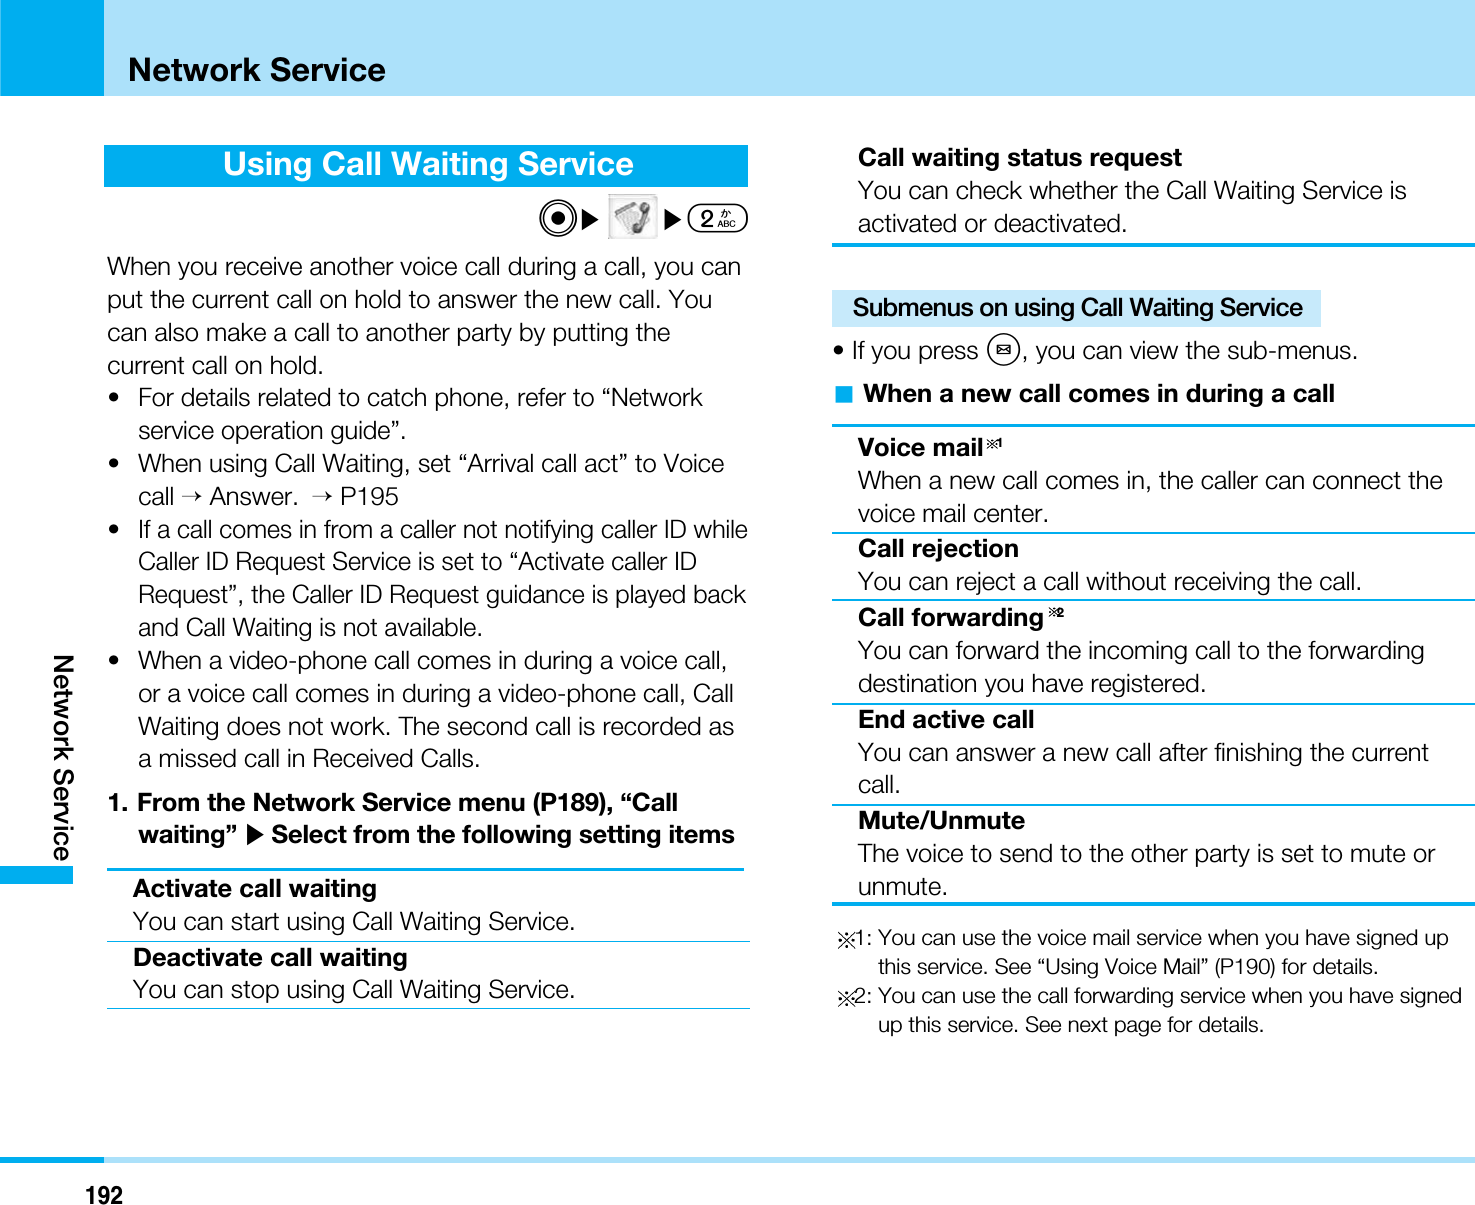 192Network ServiceNetwork ServiceUsing Call Waiting ServiceC]]2When you receive another voice call during a call, you canput the current call on hold to answer the new call. Youcan also make a call to another party by putting thecurrent call on hold.•For details related to catch phone, refer to “Networkservice operation guide”.• When using Call Waiting, set “Arrival call act” to Voicecall &gt;Answer. &gt;P195•If a call comes in from a caller not notifying caller ID whileCaller ID Request Service is set to “Activate caller IDRequest”, the Caller ID Request guidance is played backand Call Waiting is not available.• When a video-phone call comes in during a voice call,or a voice call comes in during a video-phone call, CallWaiting does not work. The second call is recorded asa missed call in Received Calls.1. From the Network Service menu (P189), “Callwaiting” ]Select from the following setting itemsActivate call waitingYou can start using Call Waiting Service.Deactivate call waitingYou can stop using Call Waiting Service.Call waiting status requestYou can check whether the Call Waiting Service isactivated or deactivated.Submenus on using Call Waiting Service• If you press M, you can view the sub-menus.aWhen a new call comes in during a callVoice mail 1When a new call comes in, the caller can connect thevoice mail center.Call rejectionYou can reject a call without receiving the call.Call forwarding 2You can forward the incoming call to the forwardingdestination you have registered.End active callYou can answer a new call after finishing the currentcall.Mute/UnmuteThe voice to send to the other party is set to mute orunmute.1: You can use the voice mail service when you have signed upthis service. See “Using Voice Mail” (P190) for details.2: You can use the call forwarding service when you have signedup this service. See next page for details.